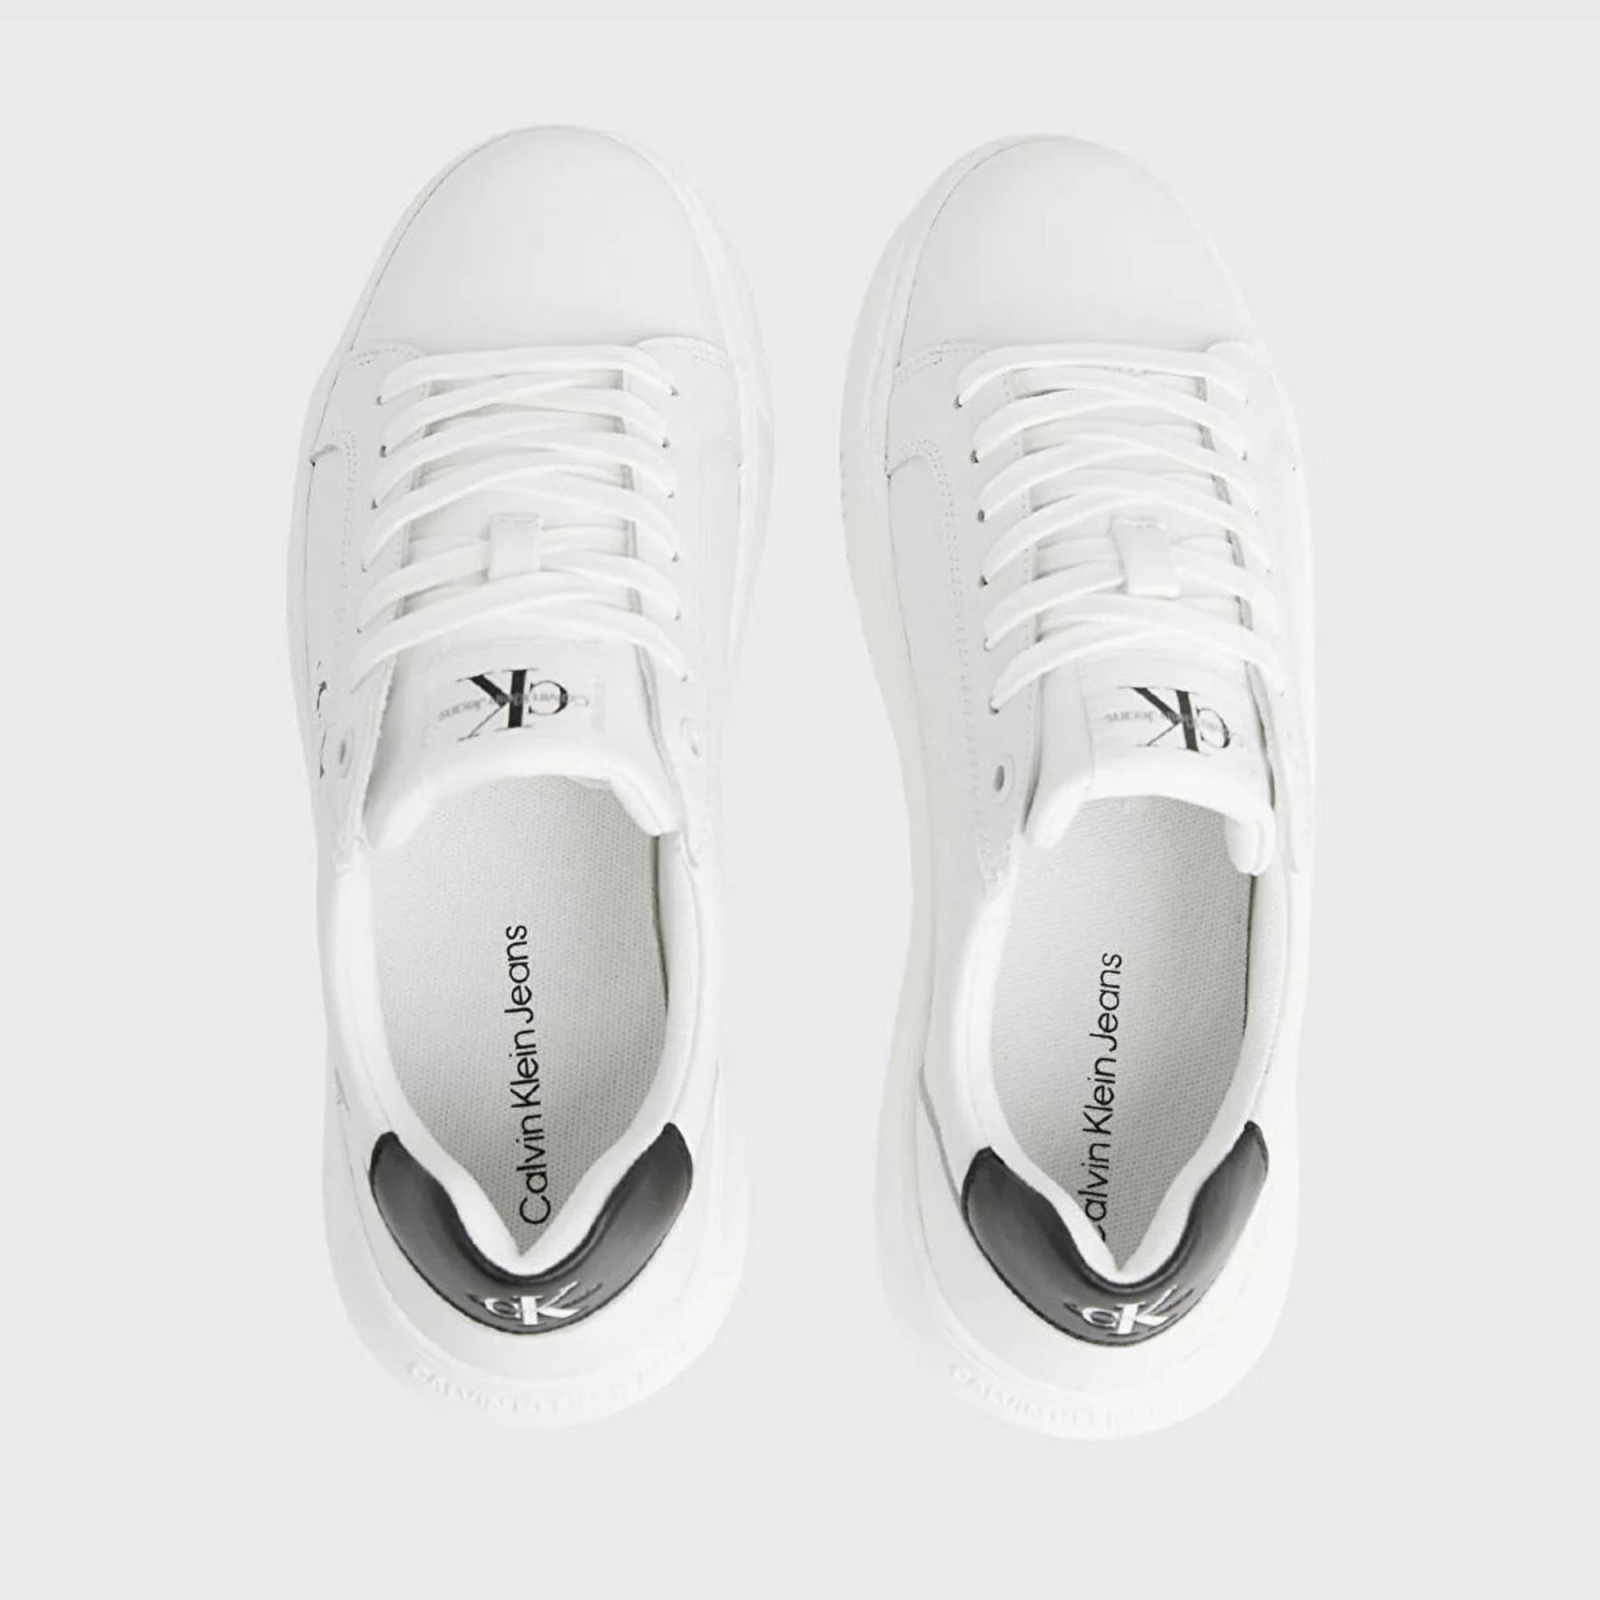 CALVIN CHUNKY CUPSOLE LEATHER MONO SNEAKERS